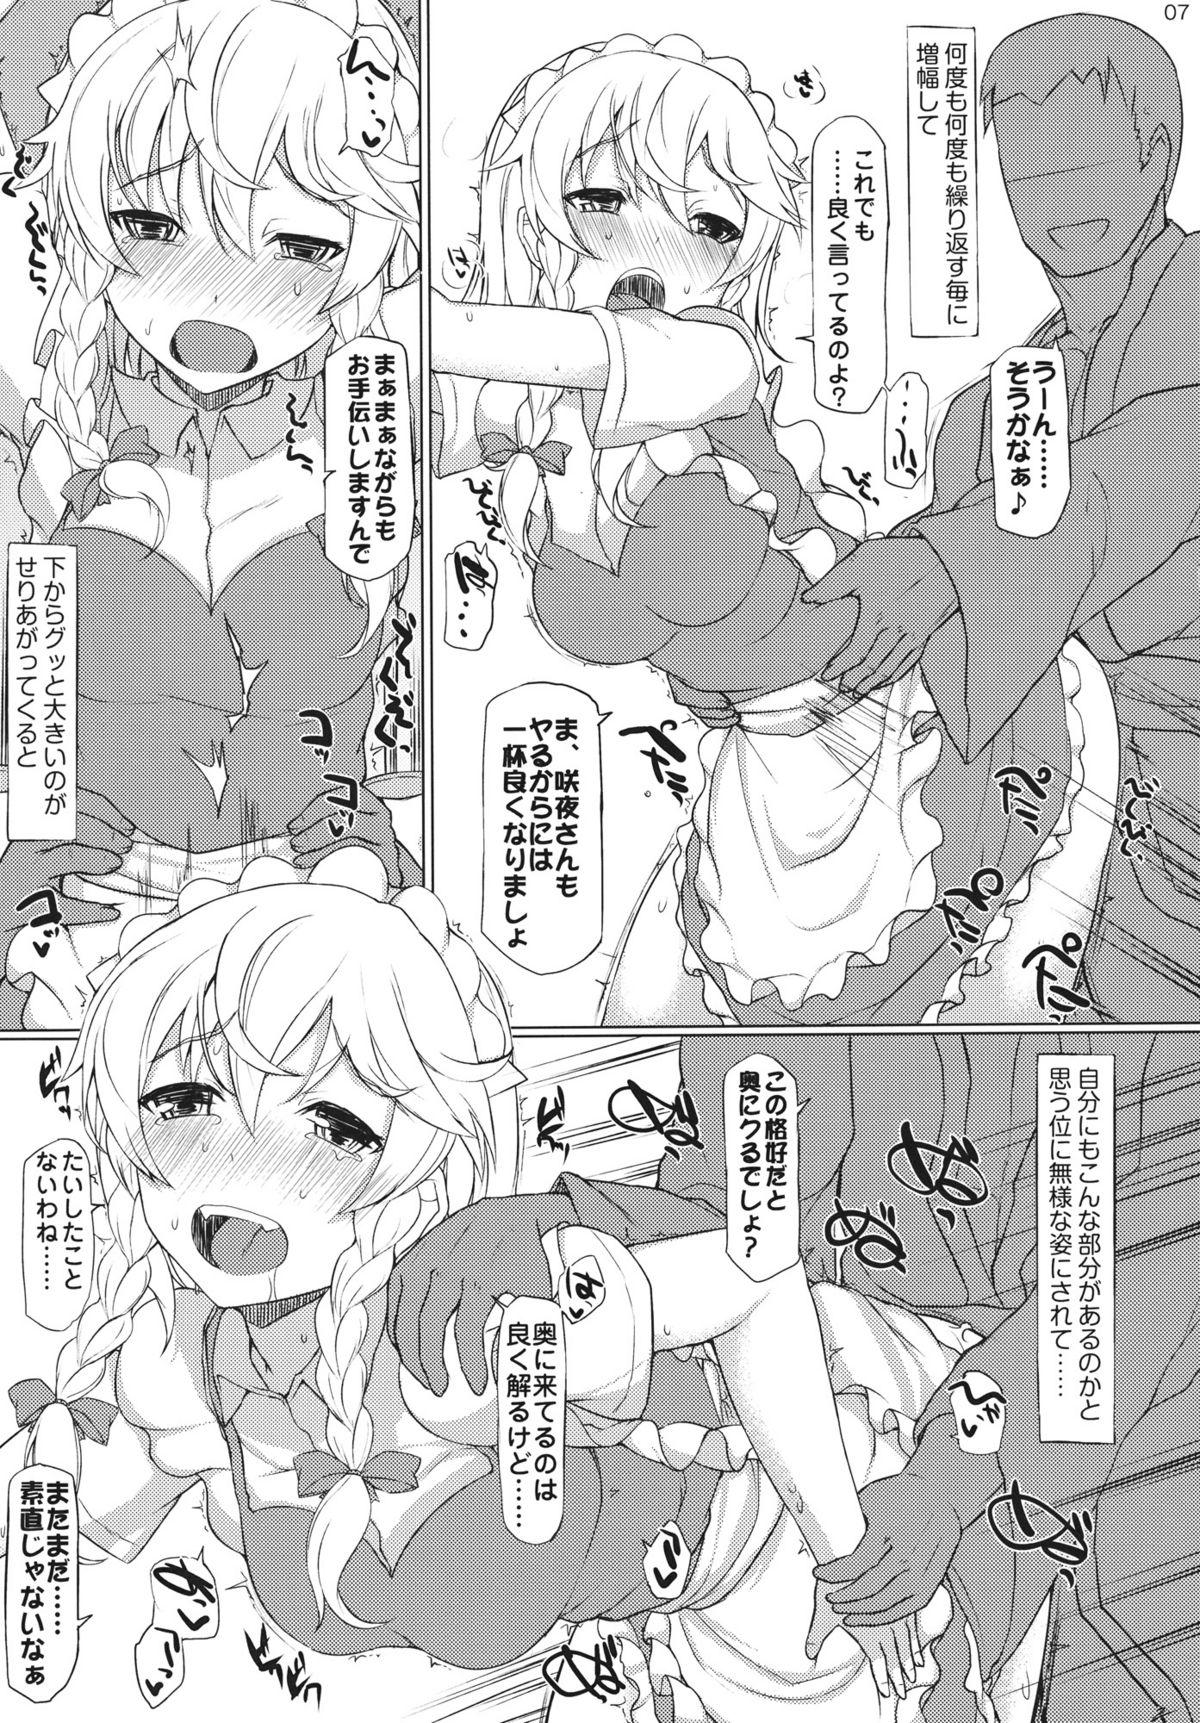 Negao Fastlove - Touhou project Hot Whores - Page 6